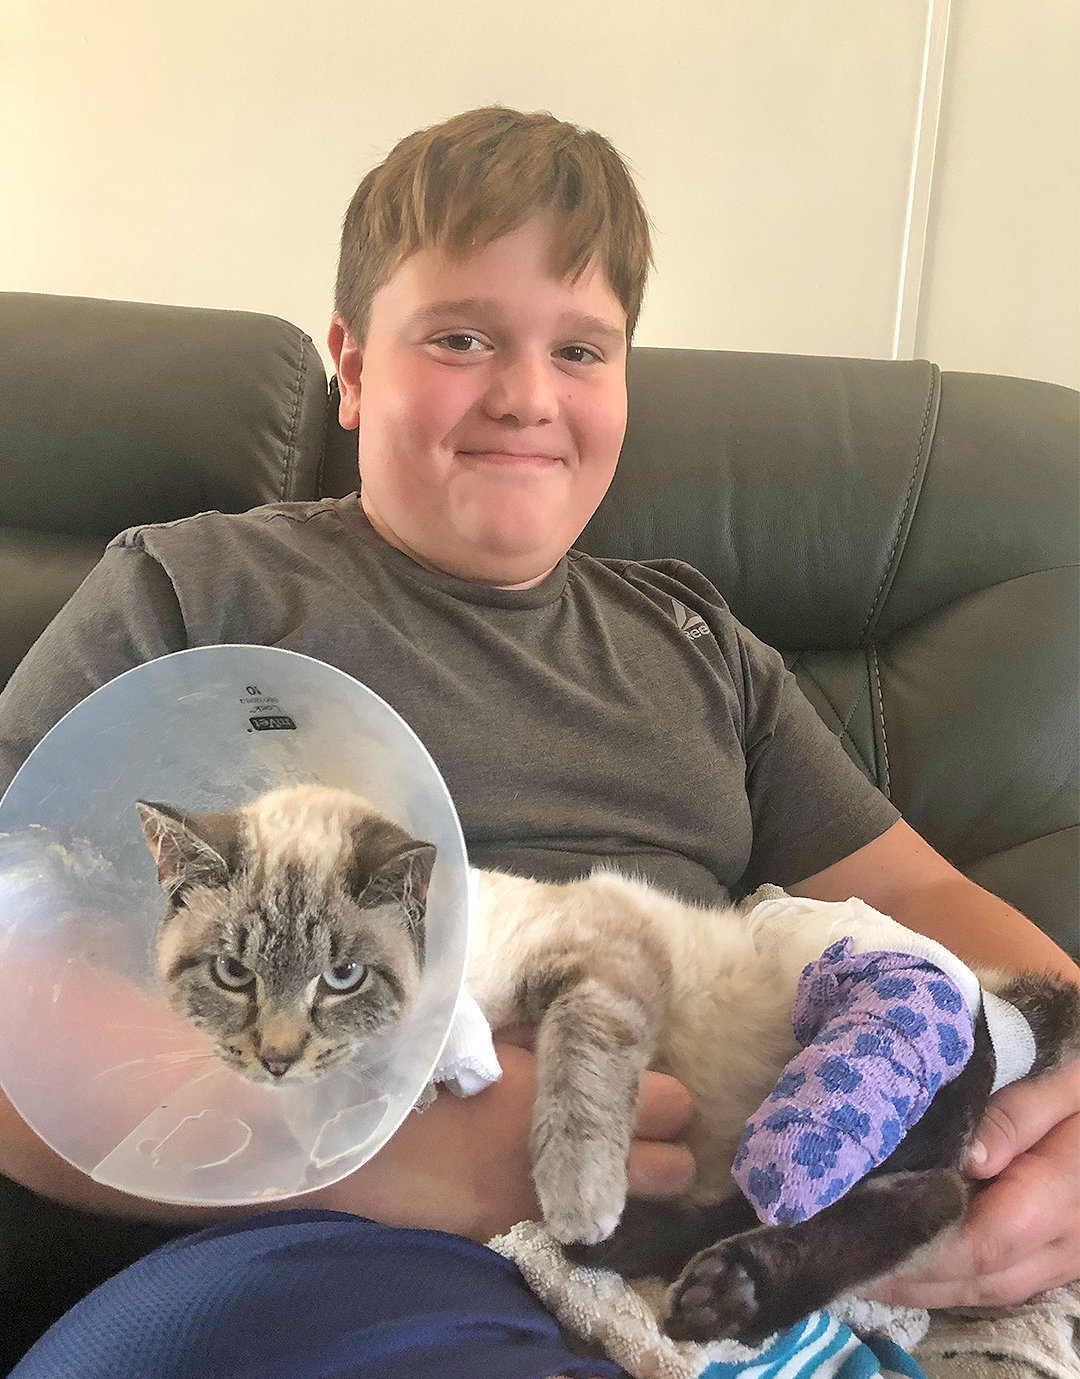 ON THE MEND — 11-year-old Jayden Rattray of Camden holds “Lucky”, a cat rescued after it was hit by a car in Camden and left for dead. After failing to find an owner, Jayden has adopted the cat as his own.